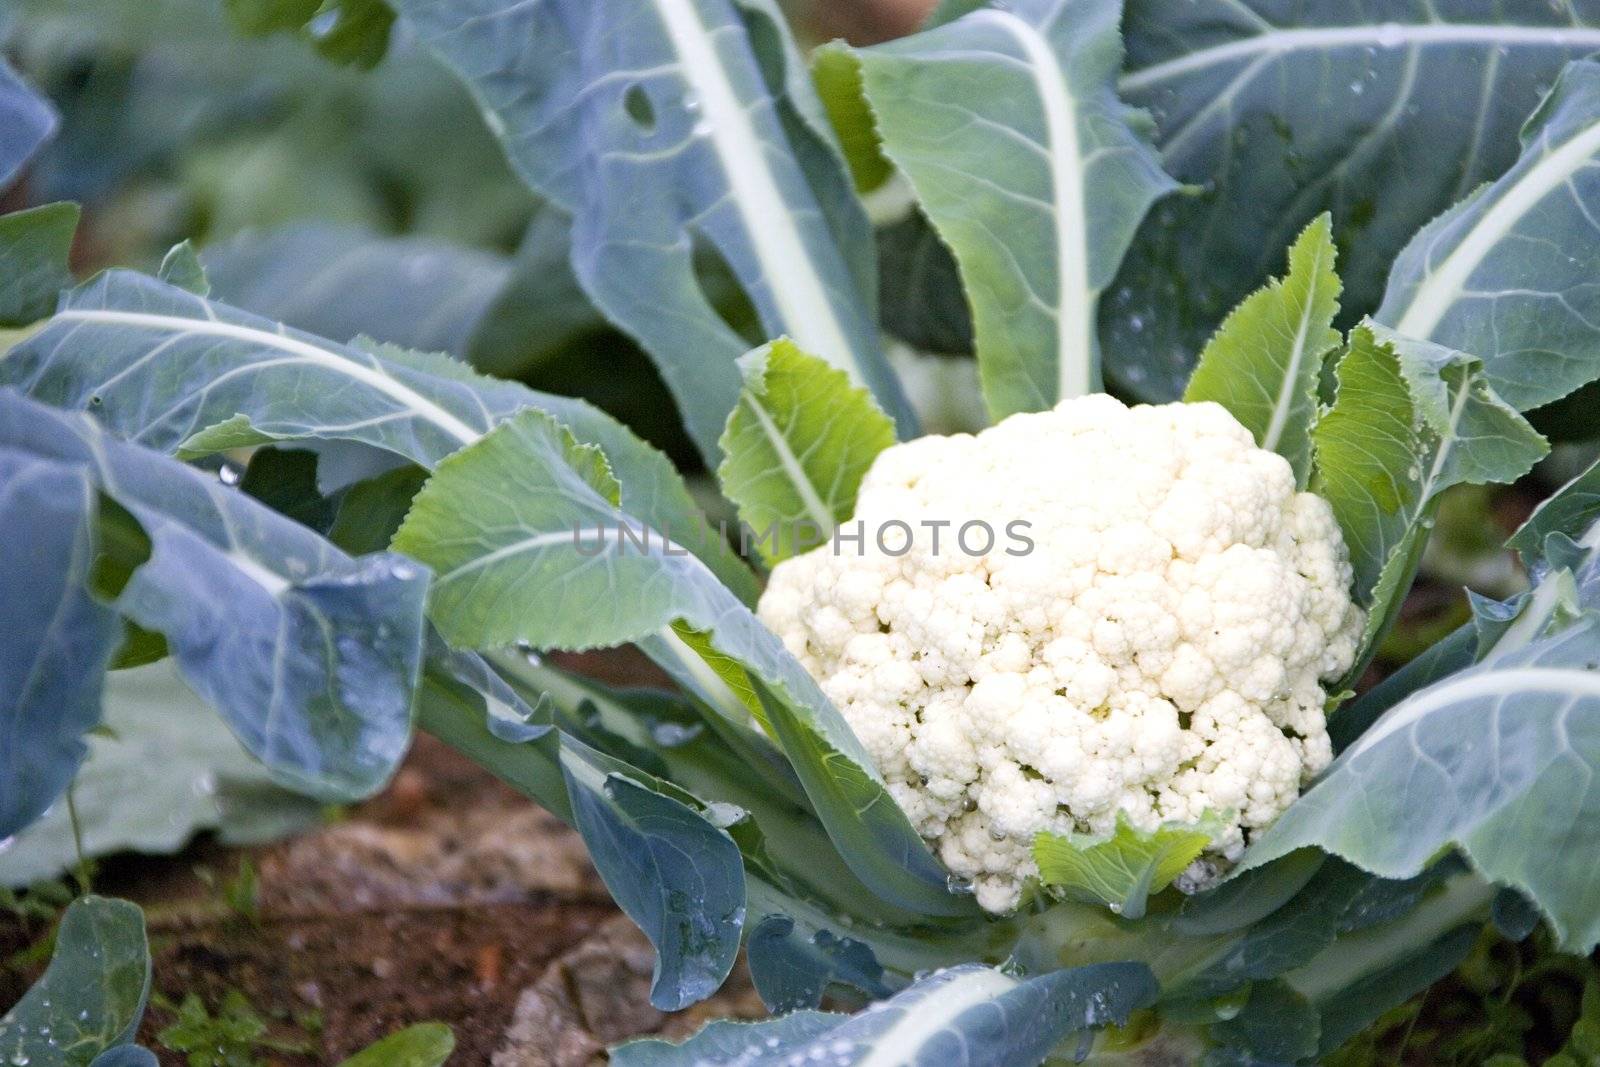 Close-up image of a cauliflower being grown at a farm in Malaysia.